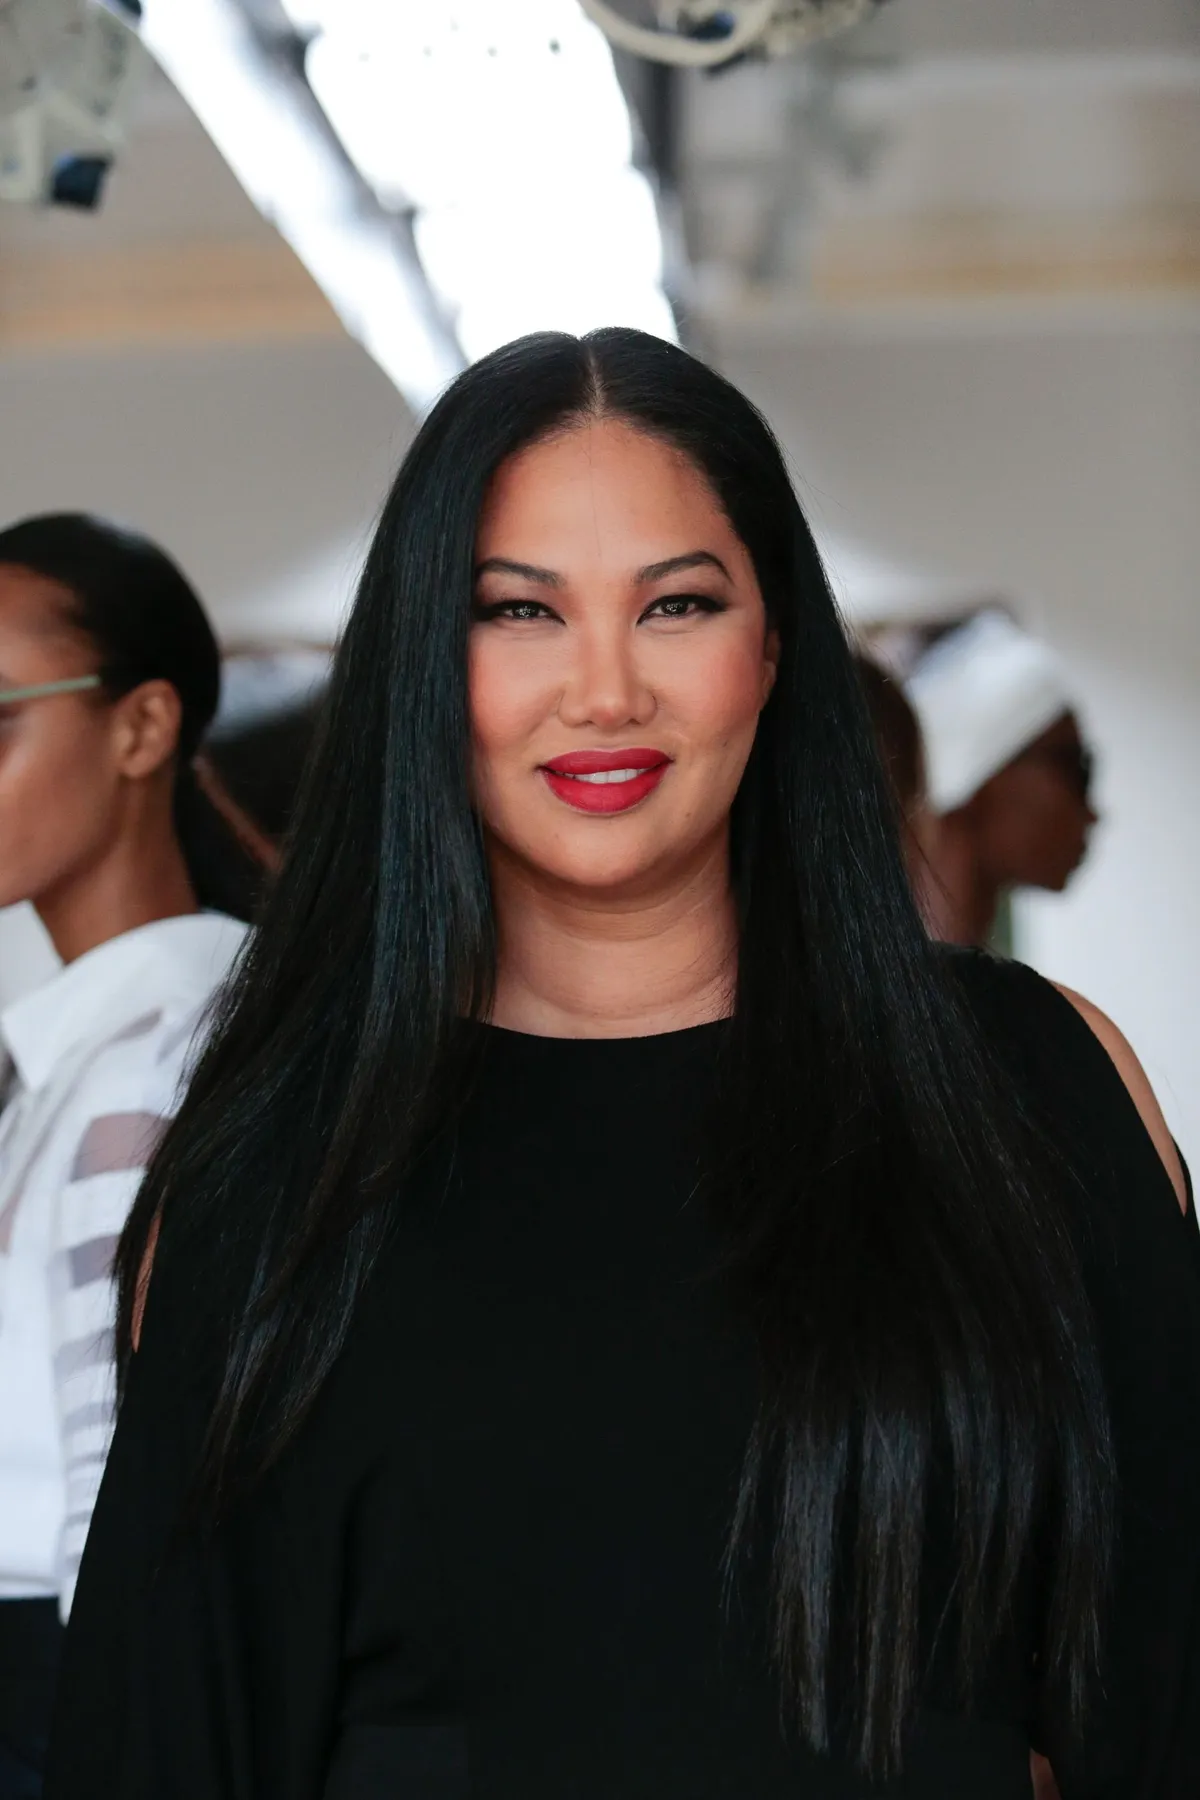 Kimora Lee Simmons during New York Fashion Week at The Gallery, Skylight at Clarkson Squrare on September 14, 2016 | Photo: Getty Image